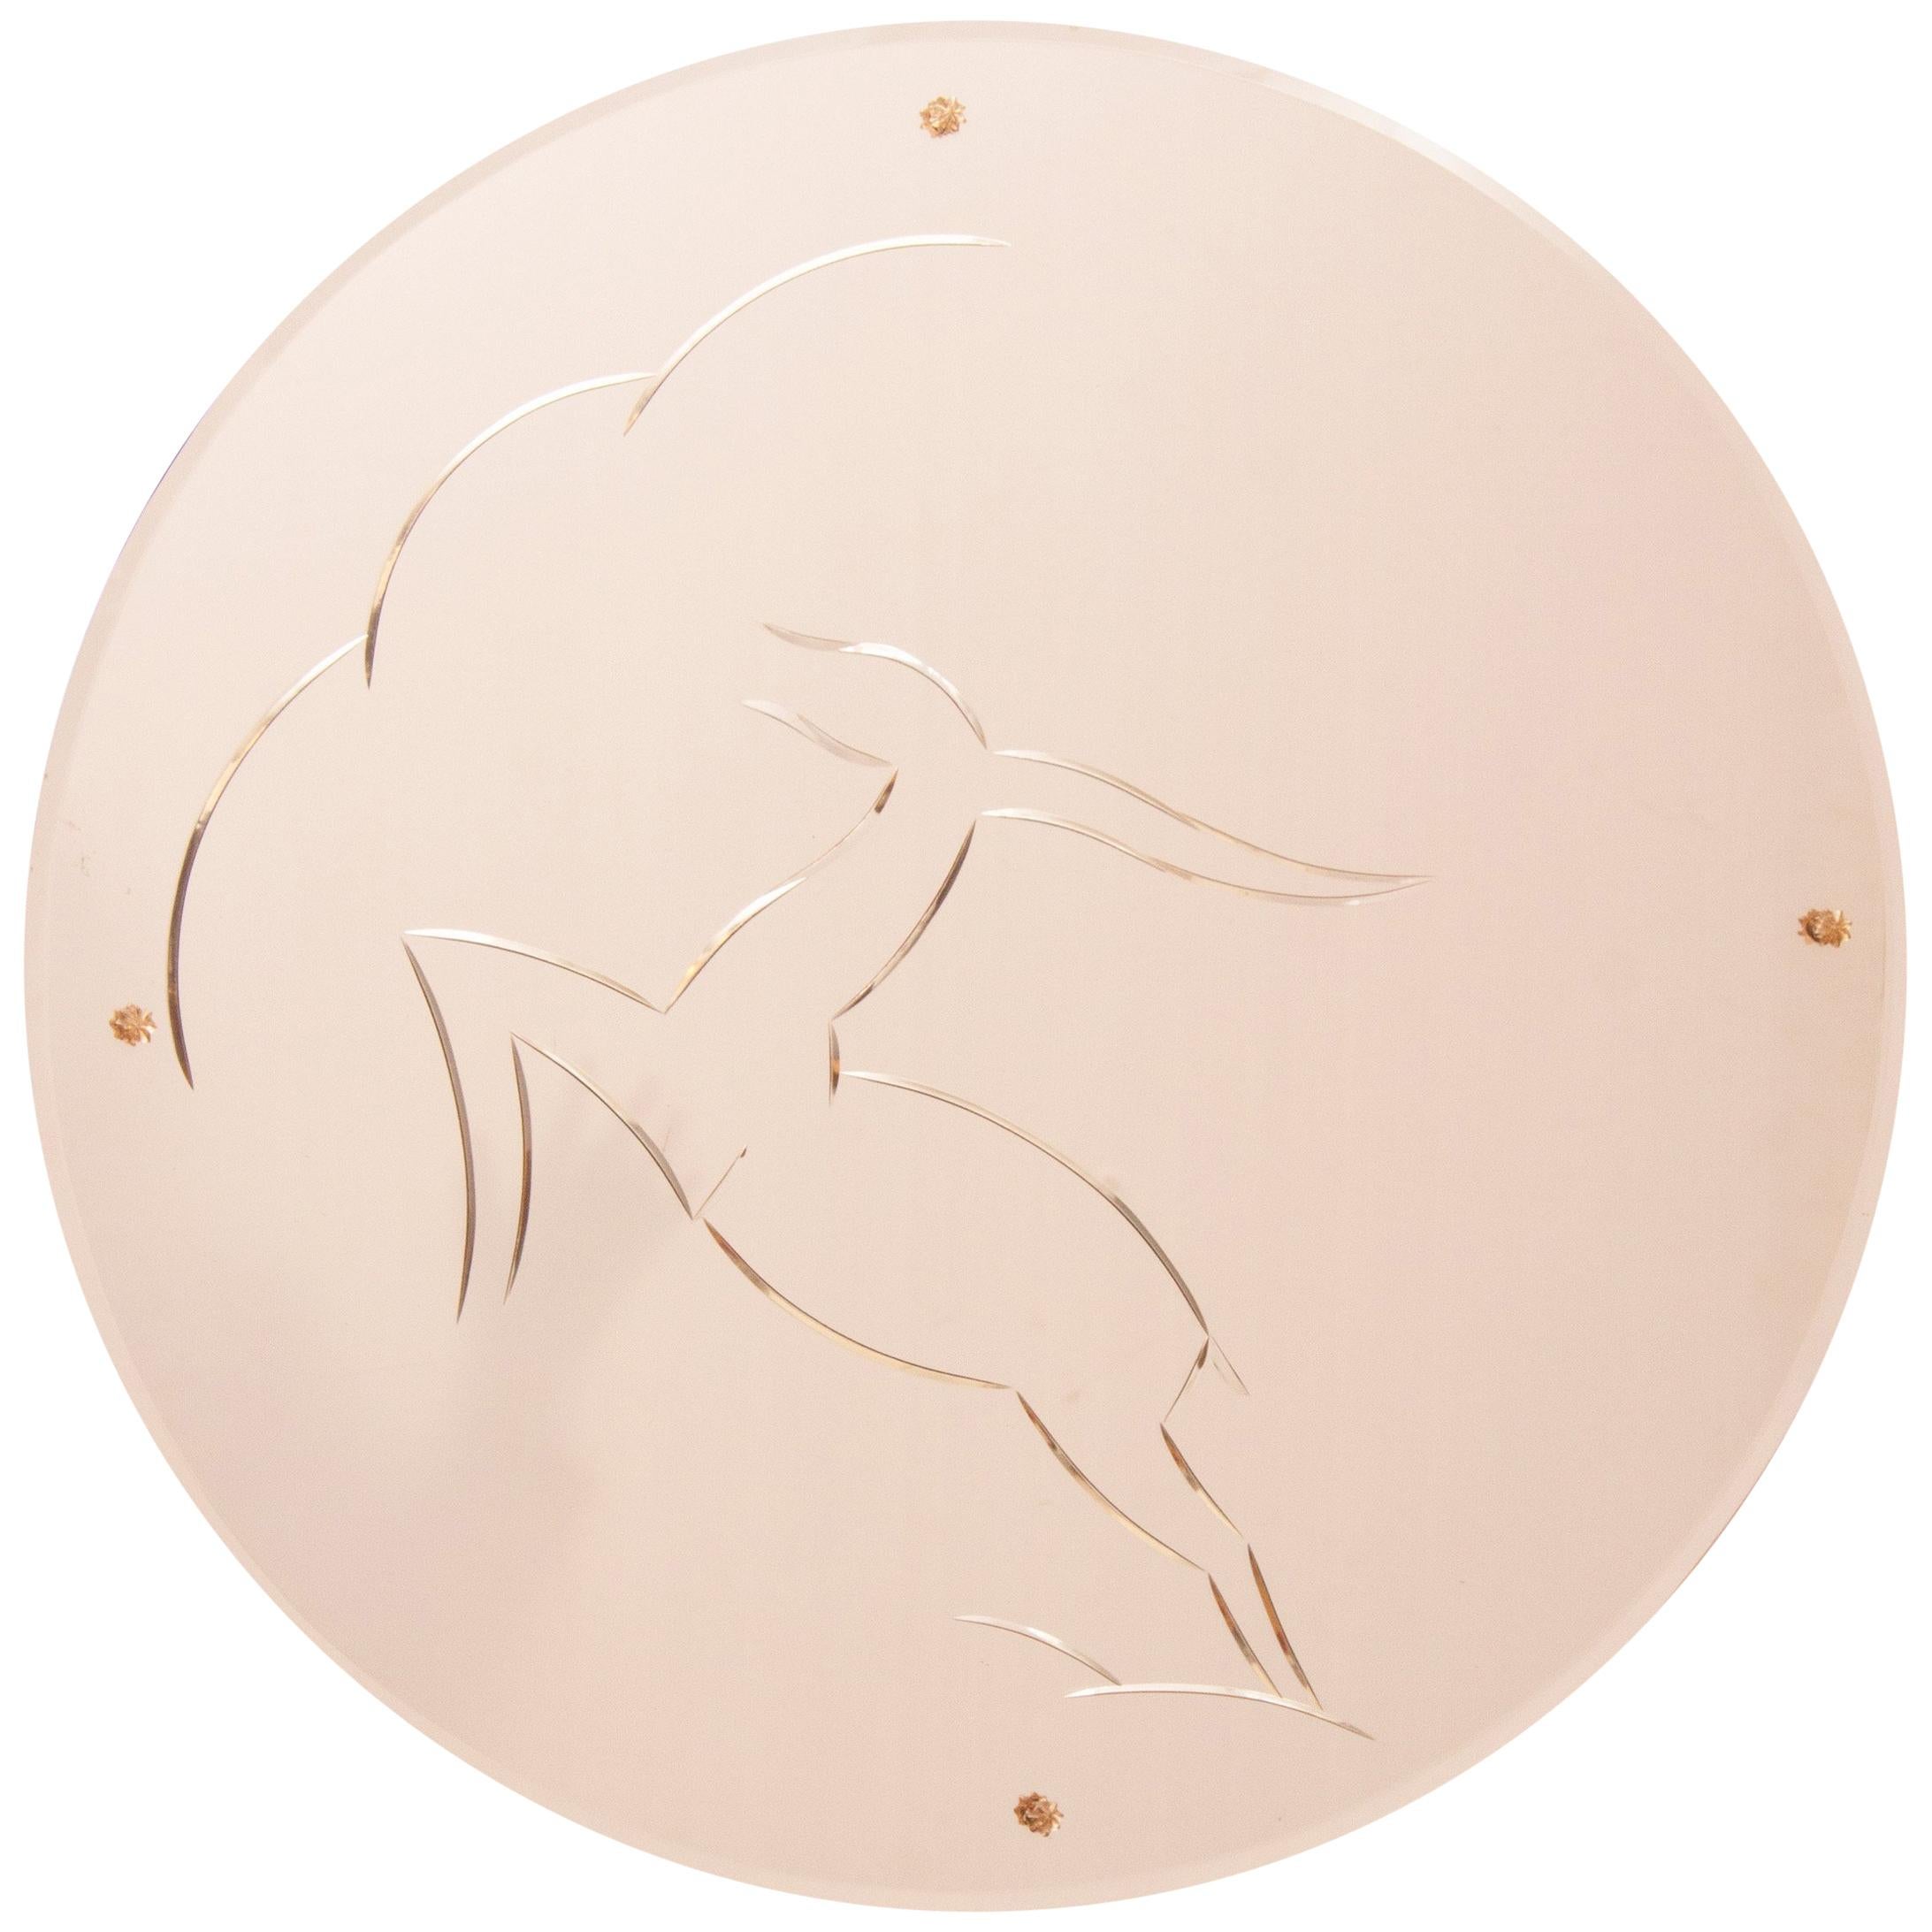 Art Deco Mirror with Leaping Gazelle Design on Peach Mirror Glass